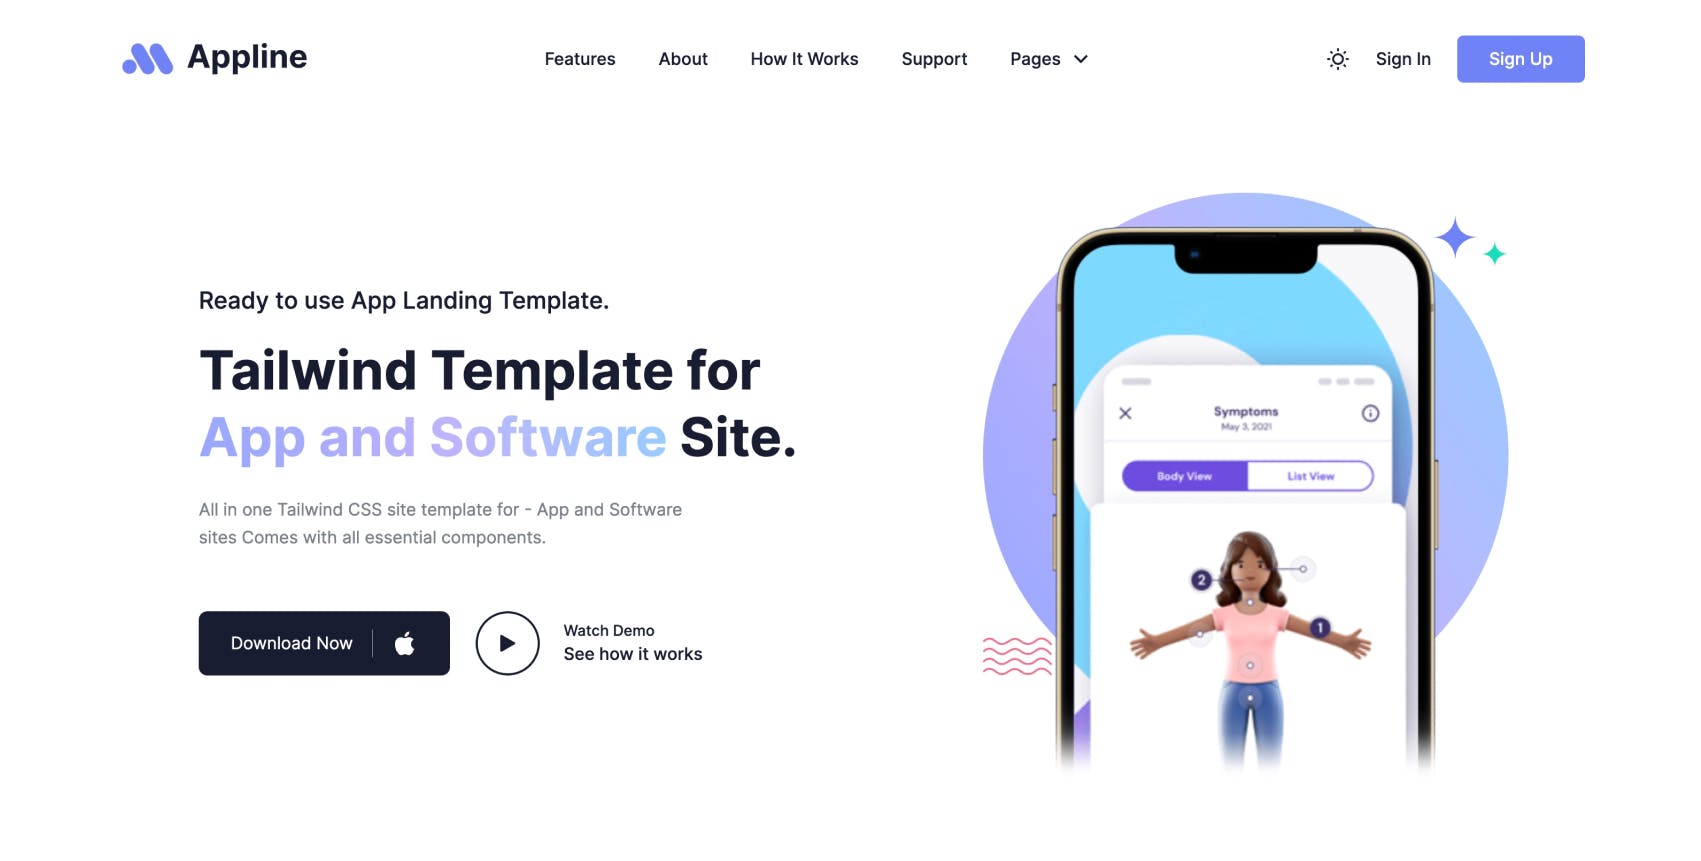 Appline - Tailwind CSS App and Software Template